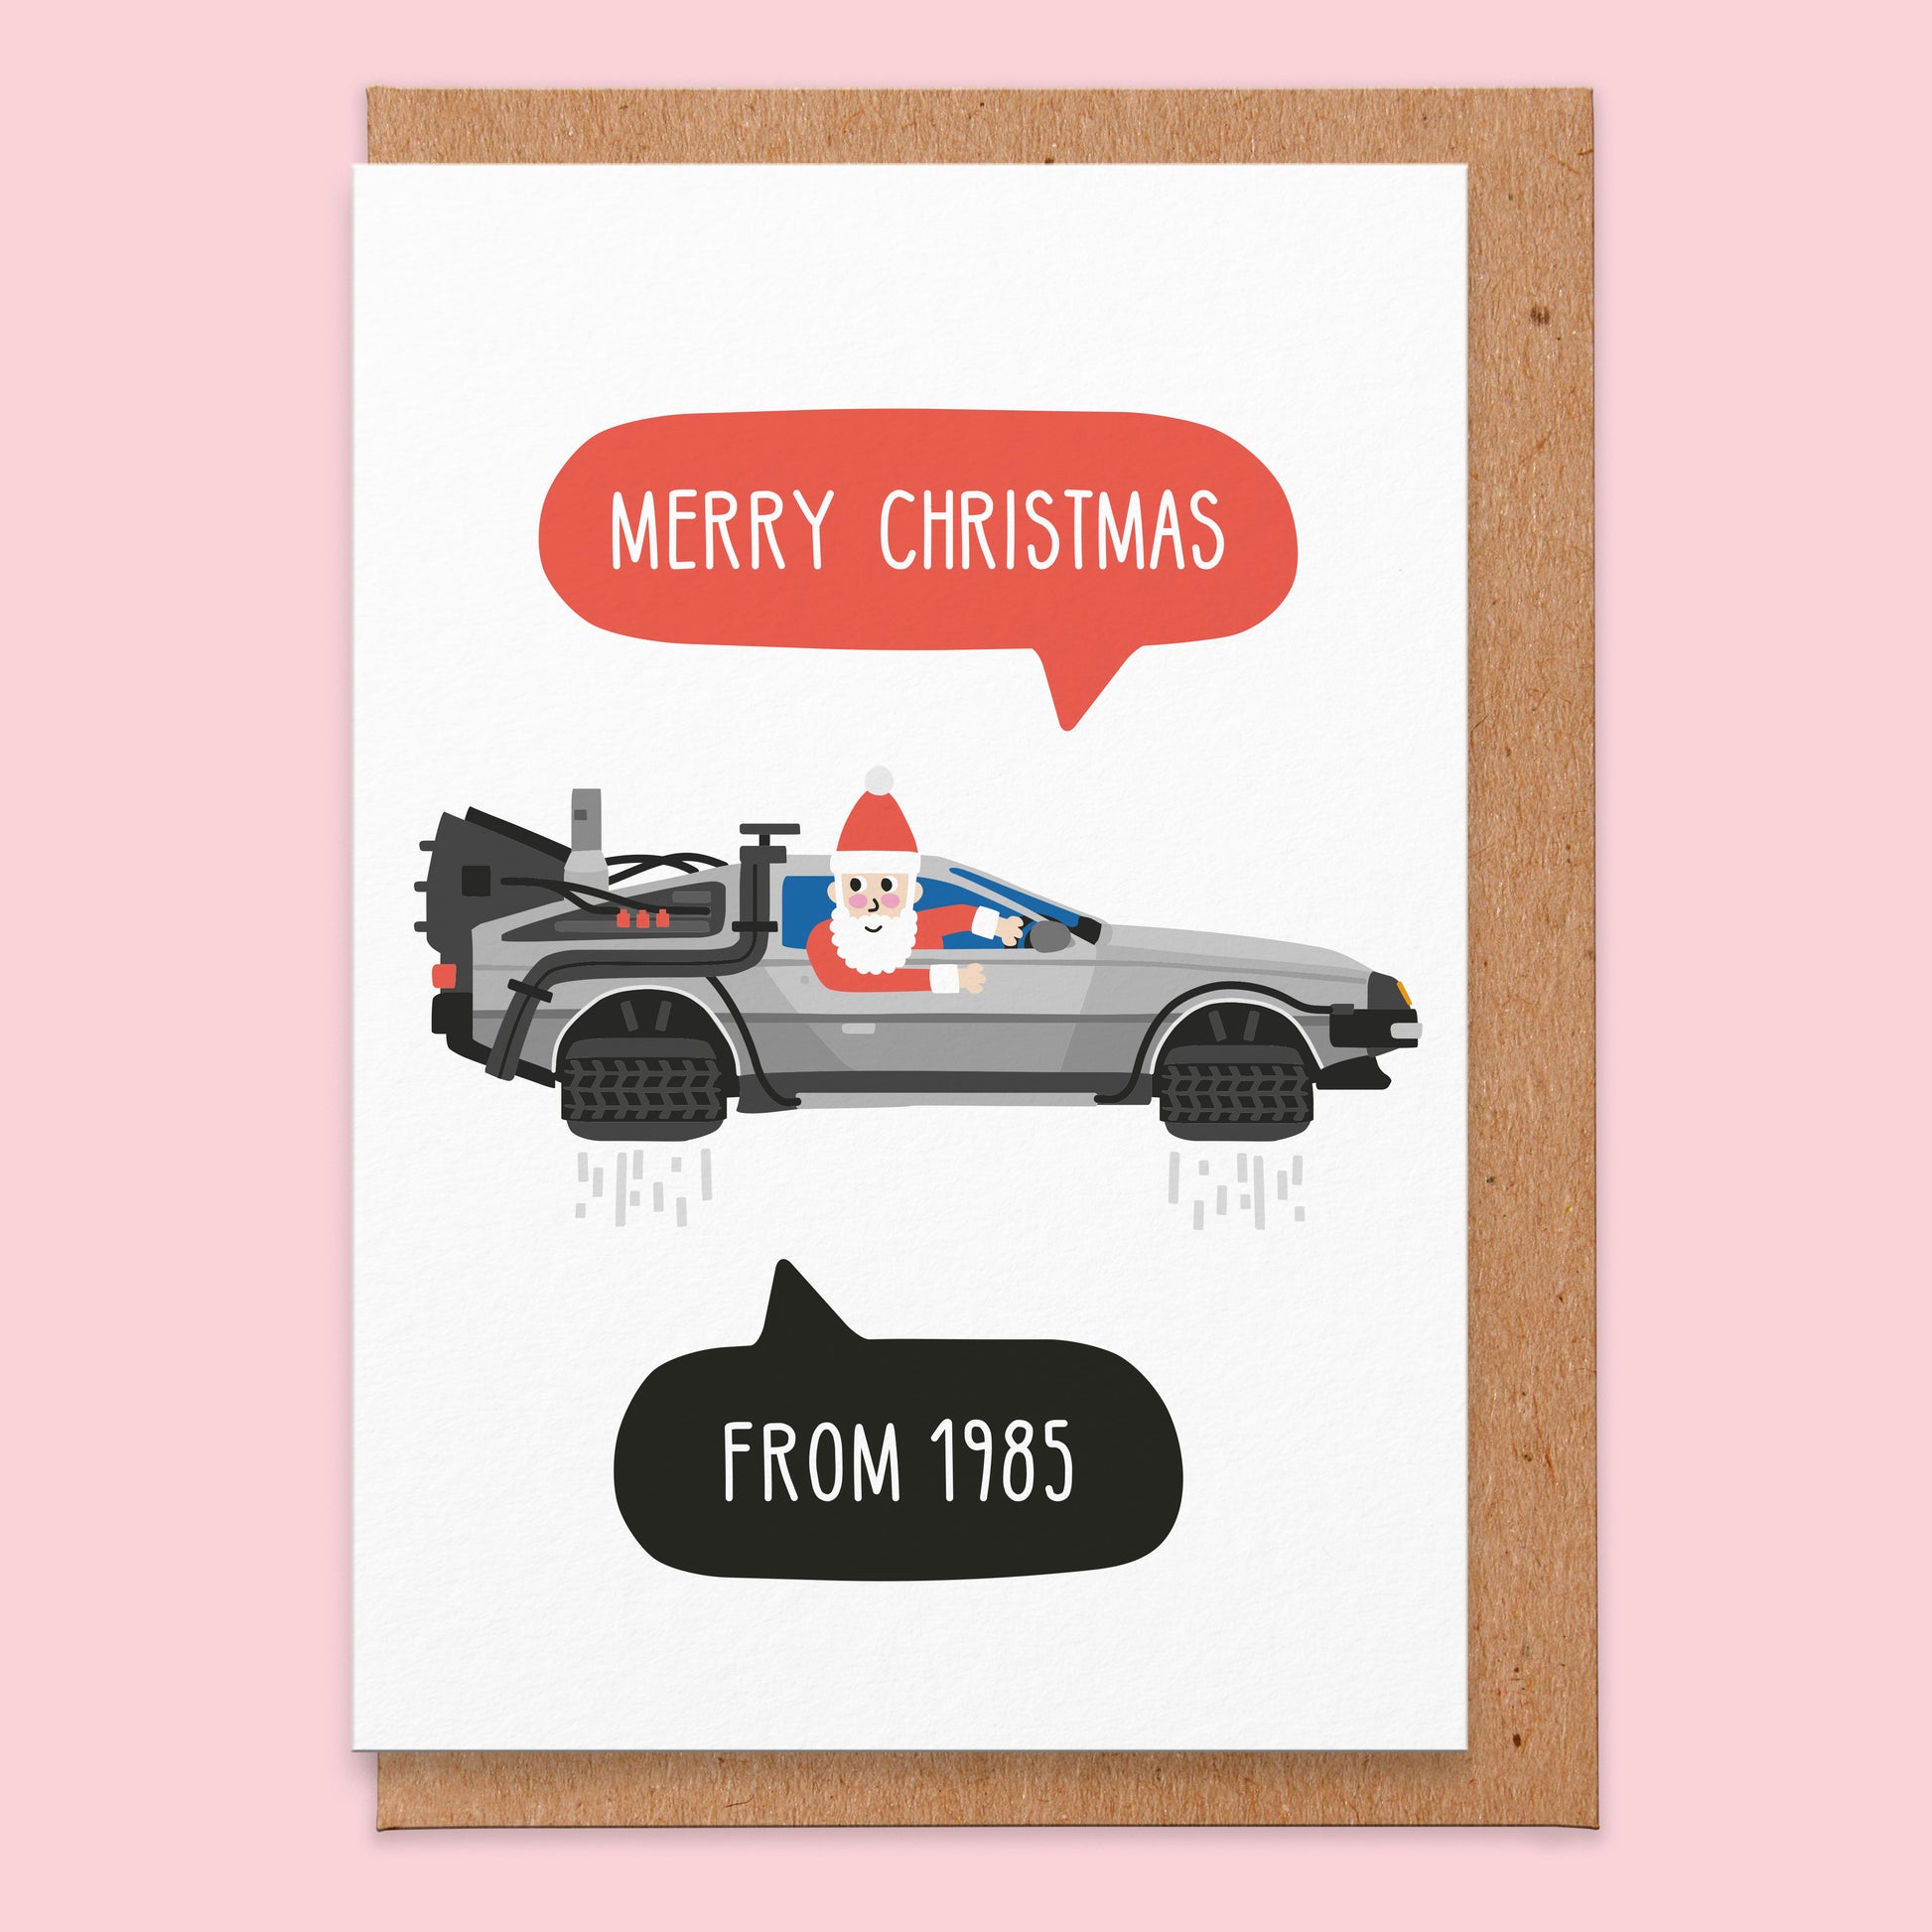 Christmas greetings card with santa driving a car from a sci fi movie and says Merry Christmas From 1985